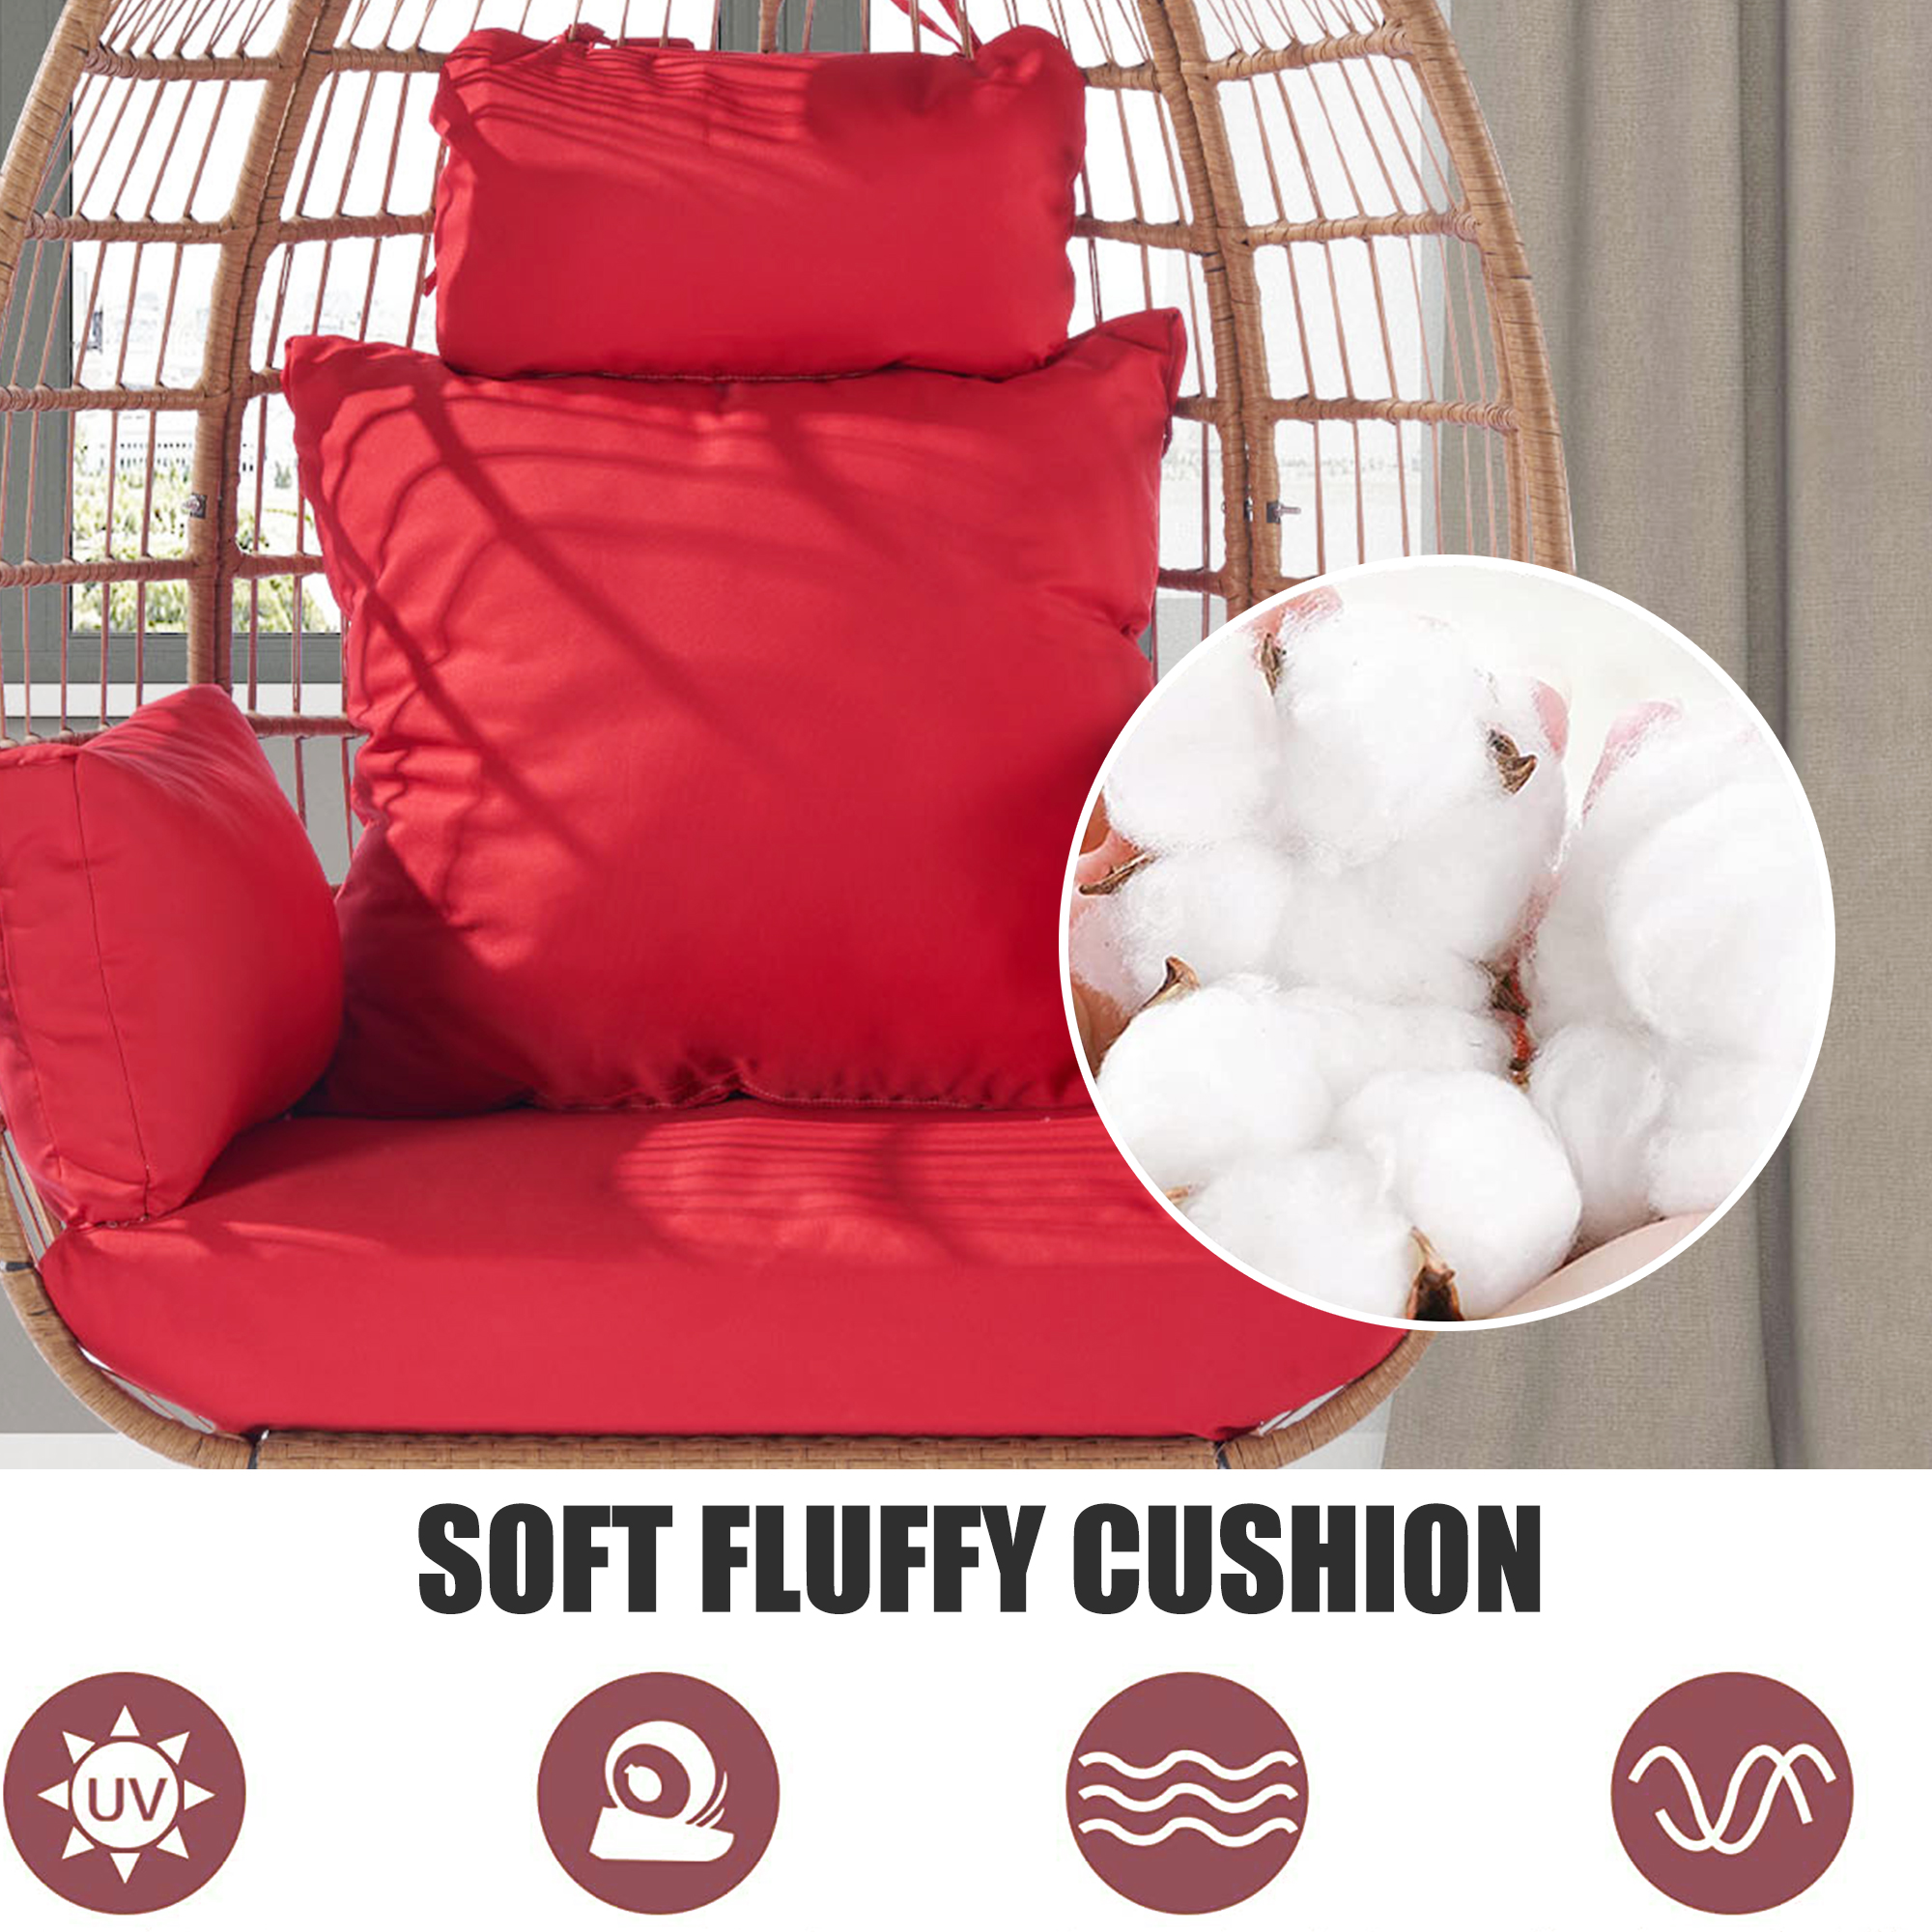 Outdoor Stationary Egg Chair, Wicker Egg Swing Chair with Red Cushions for Patio, Garden, Backyard, Rattan Standing Egg Chair - image 4 of 10